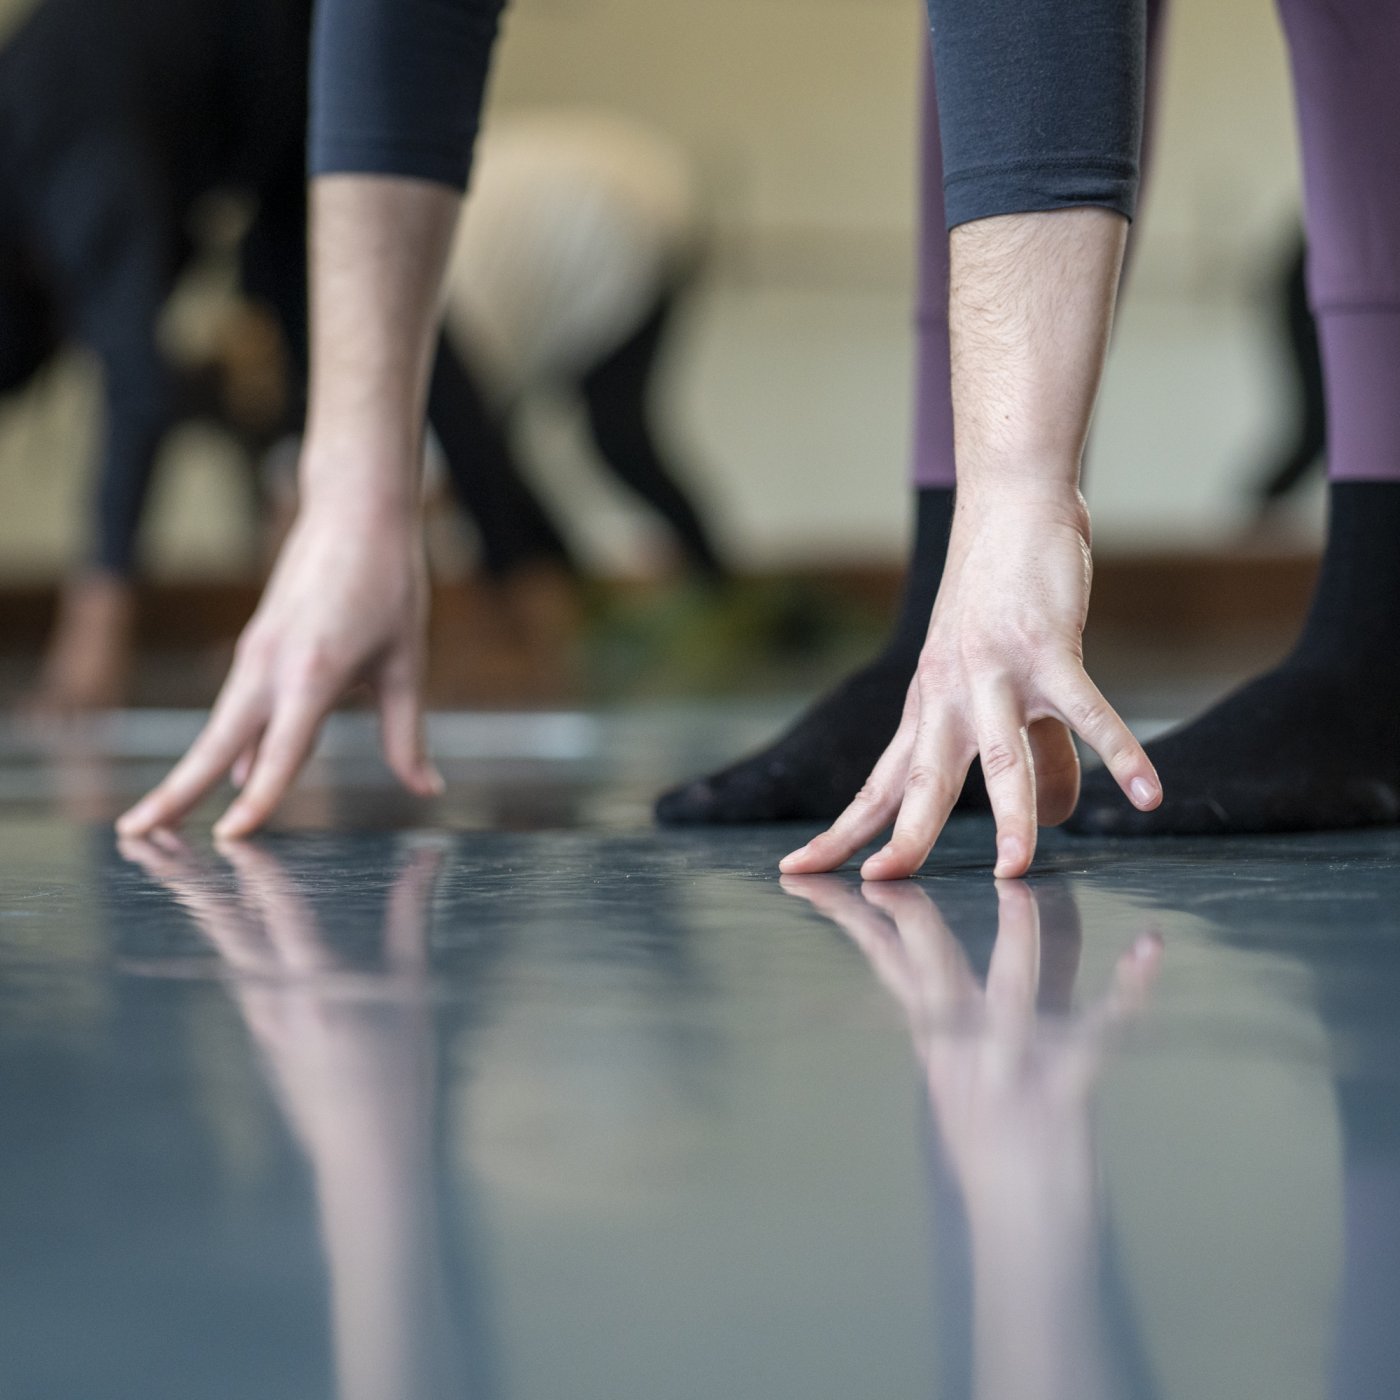 A dancer's fingers touching the floor.